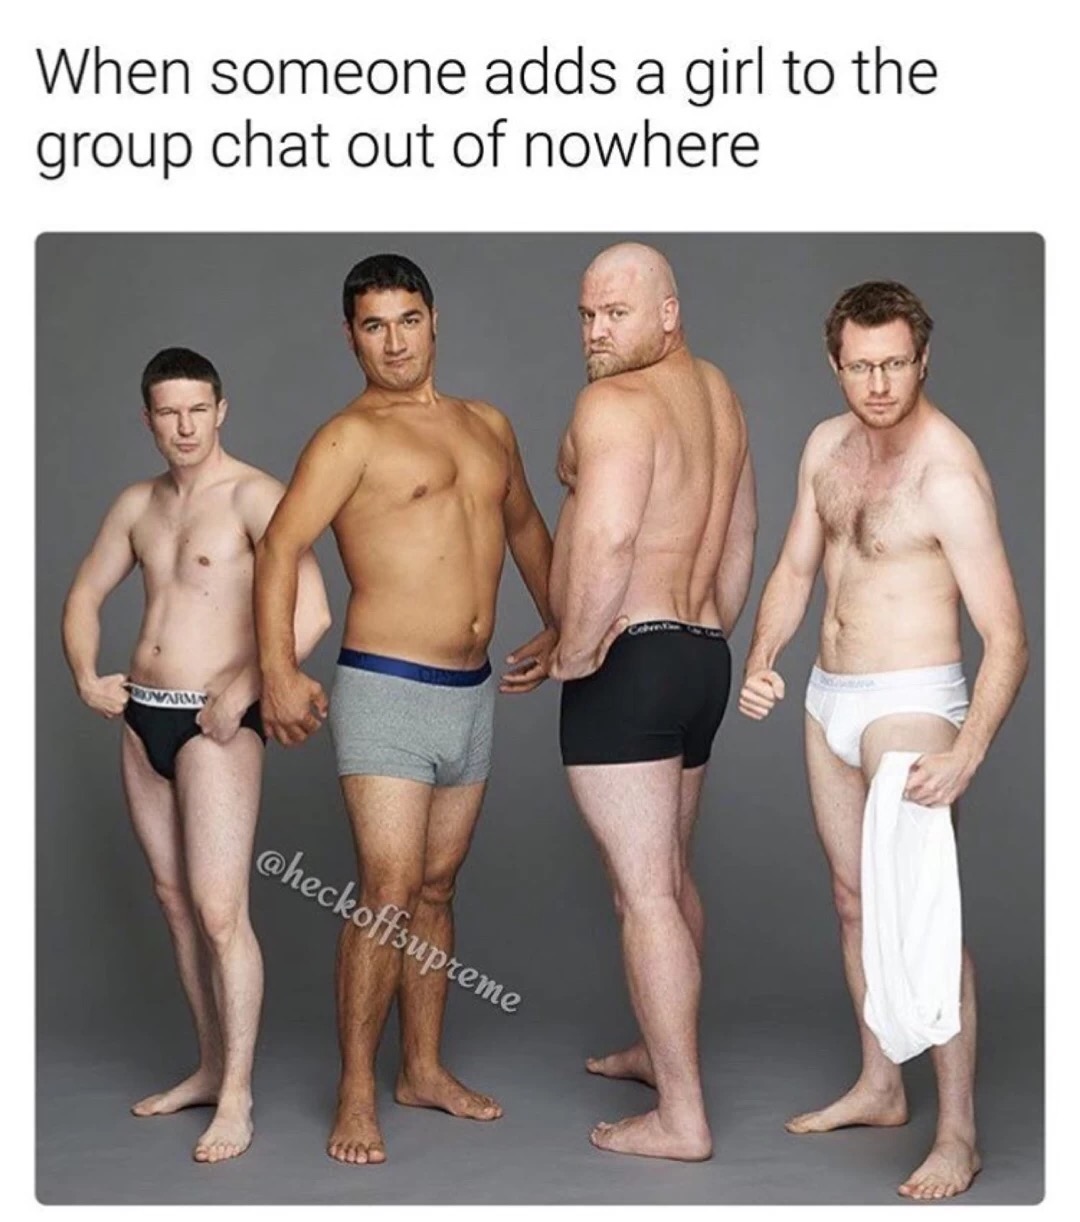 Meme about how guys change their posture when a girl comes into the group chat.